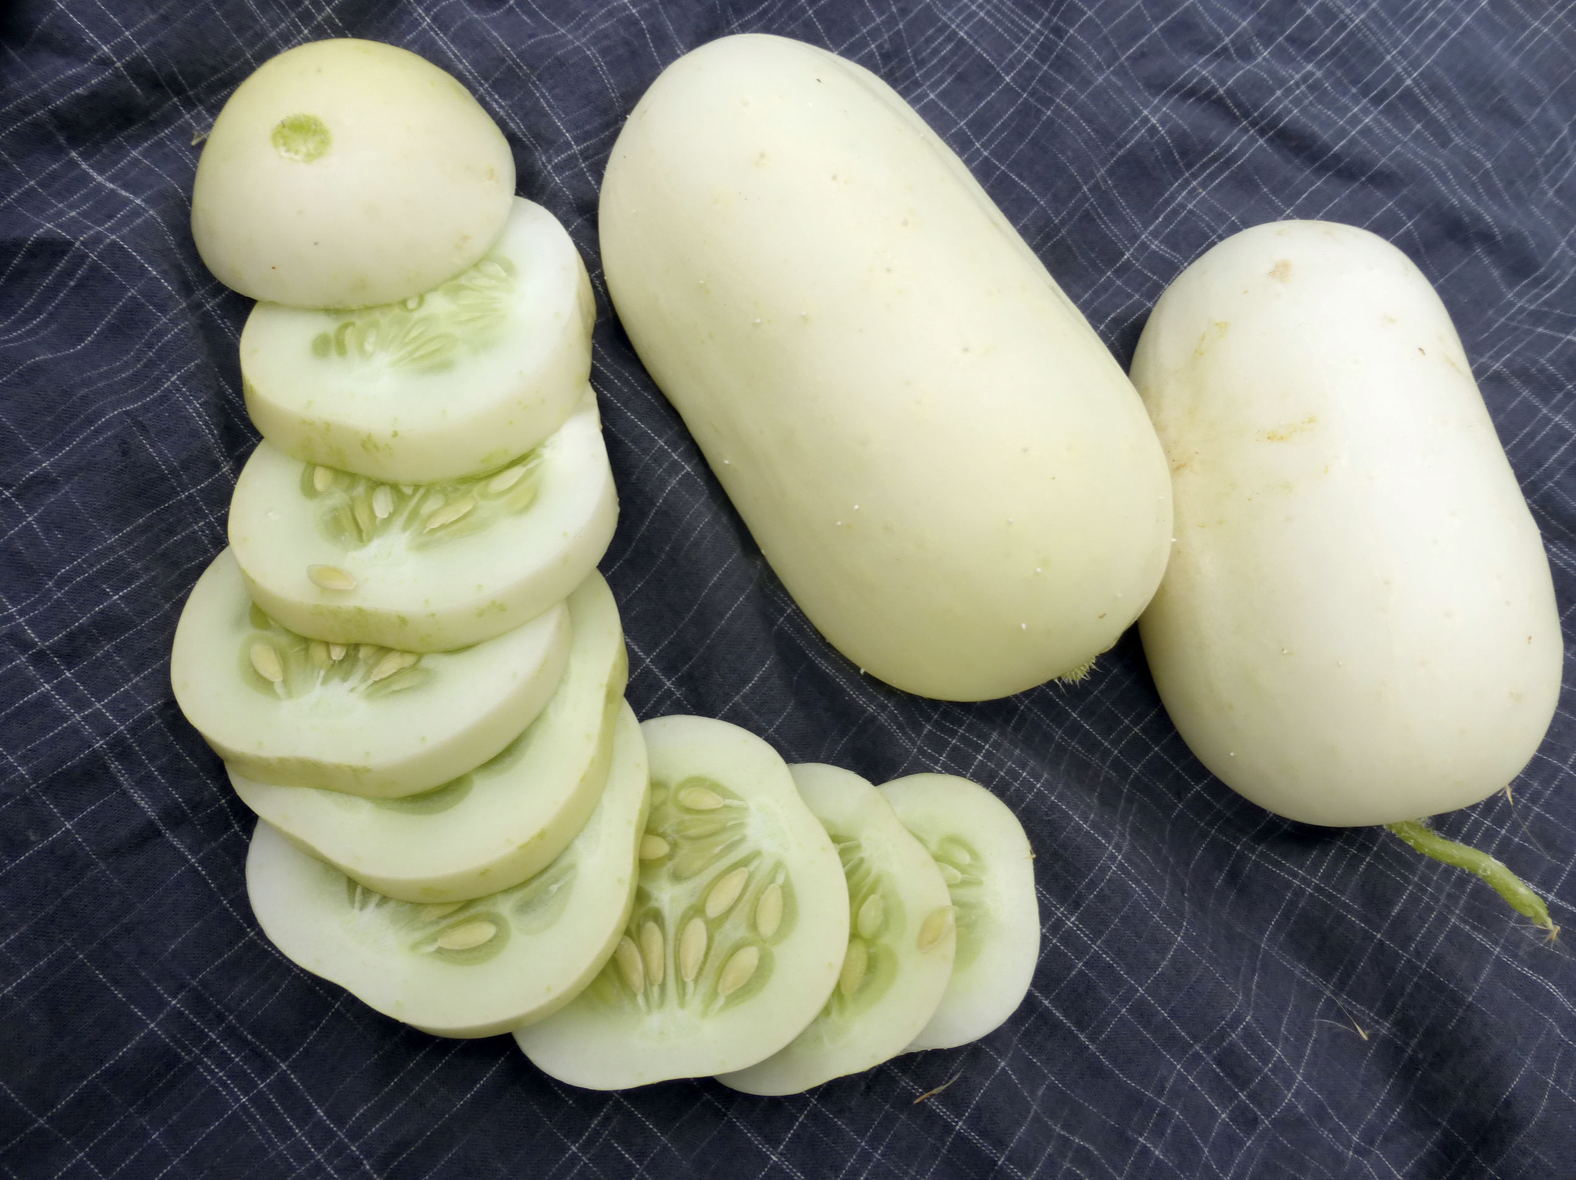 Roseland Small White Pickling Cucumber